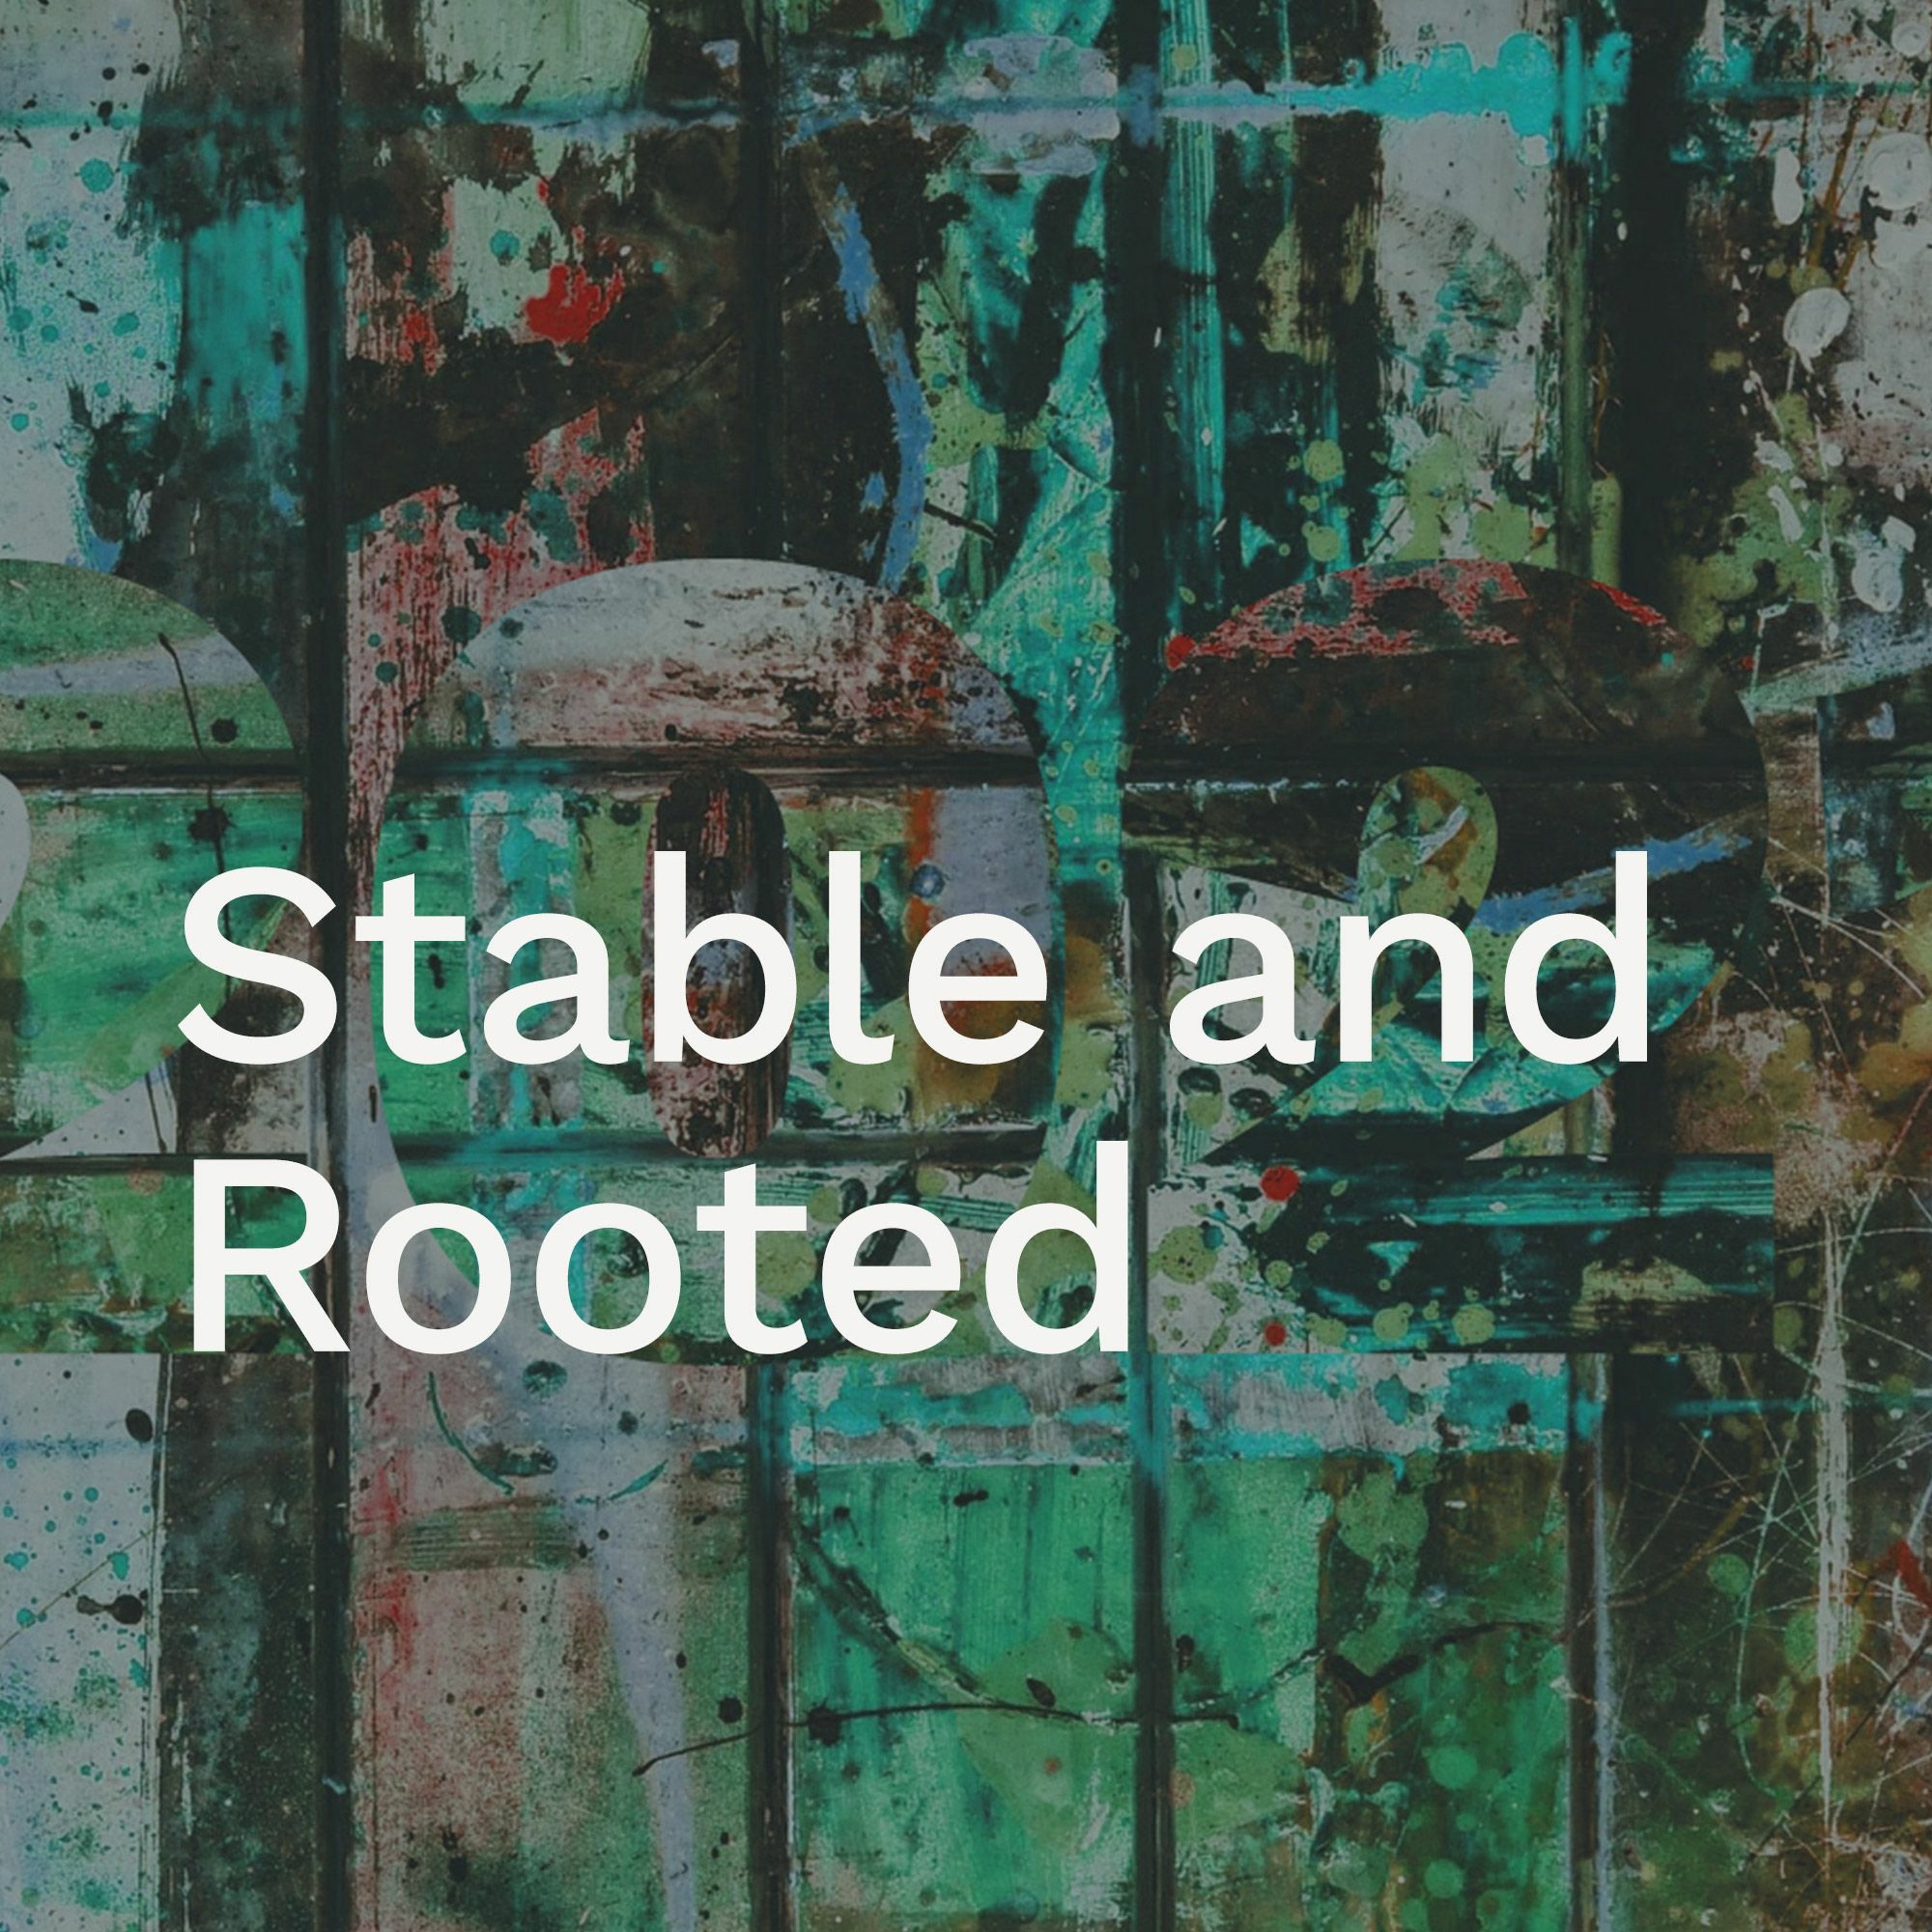 ’Stabled and Rooted’ / Neil Dawson